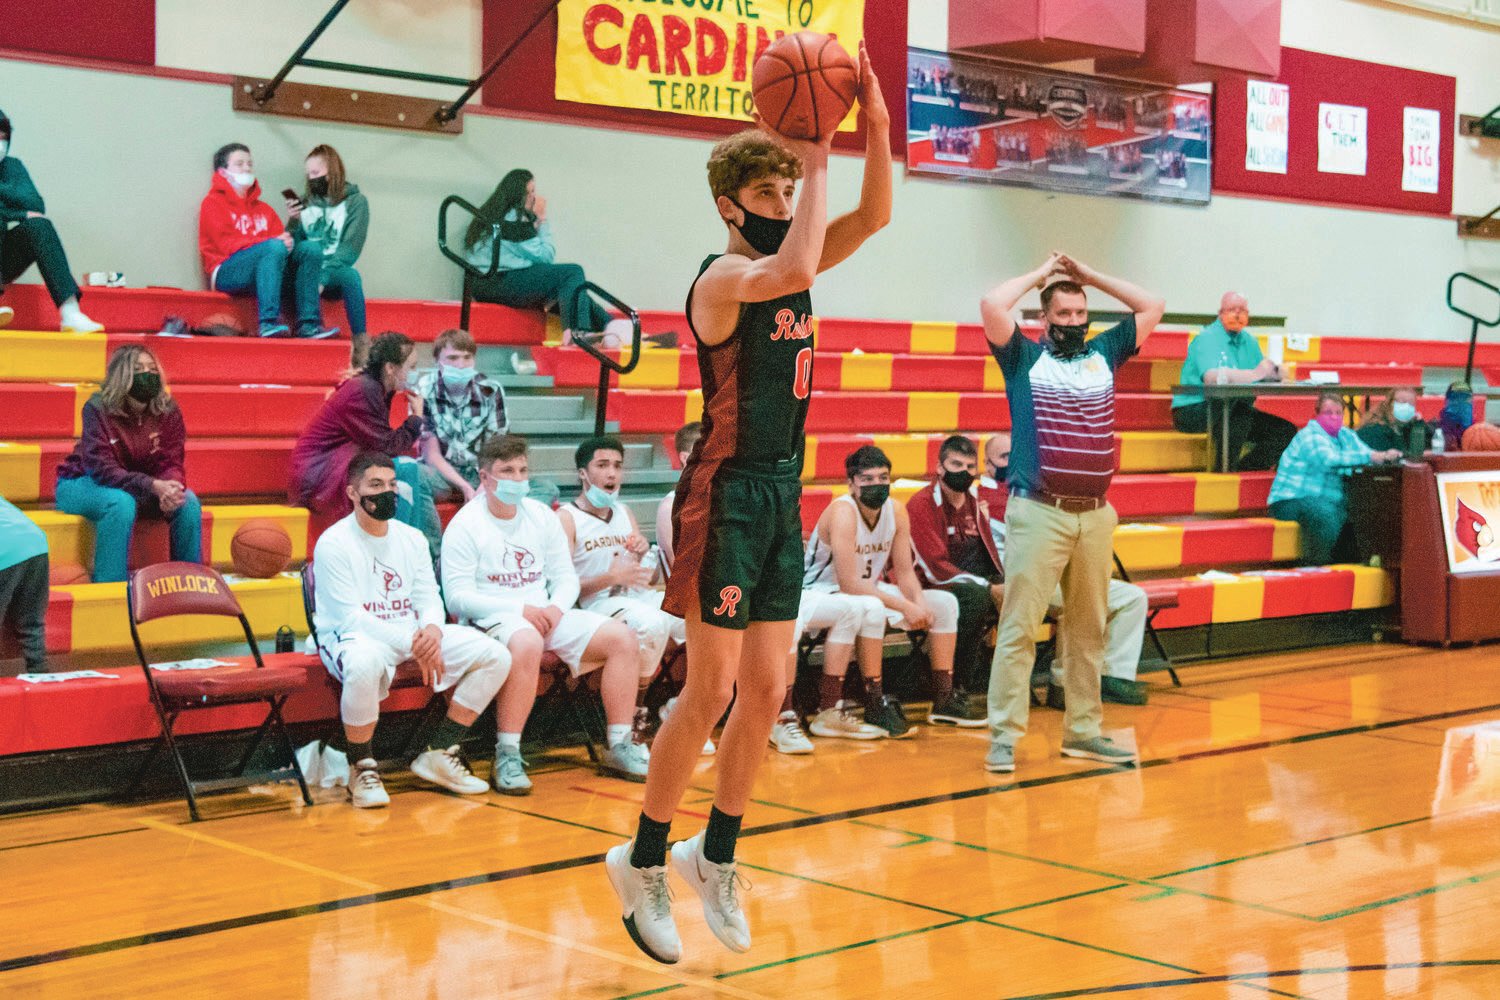 Rainier’s Ian Sprouffske (0) makes a three-point shot during a game against the Cardinals in Winlock.